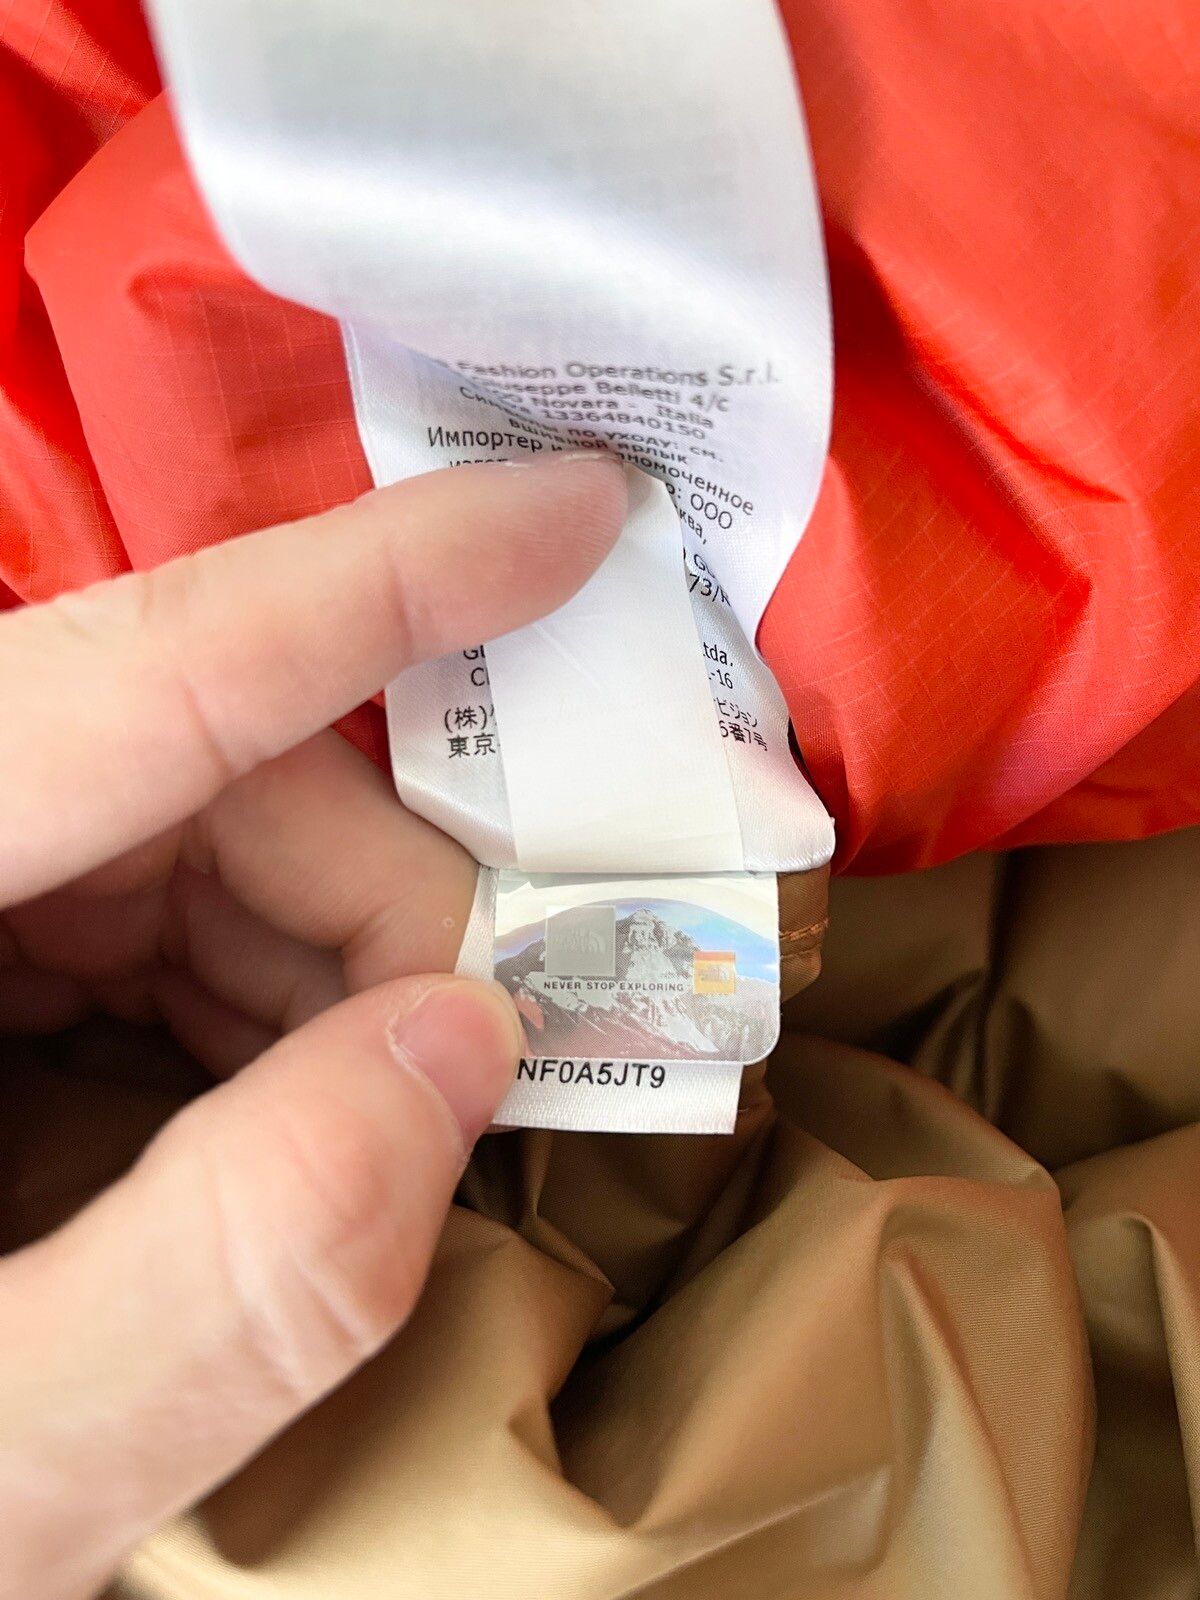 GRAIL! 2021 Gucci x The North Face Puffer Jacket in Large - 17